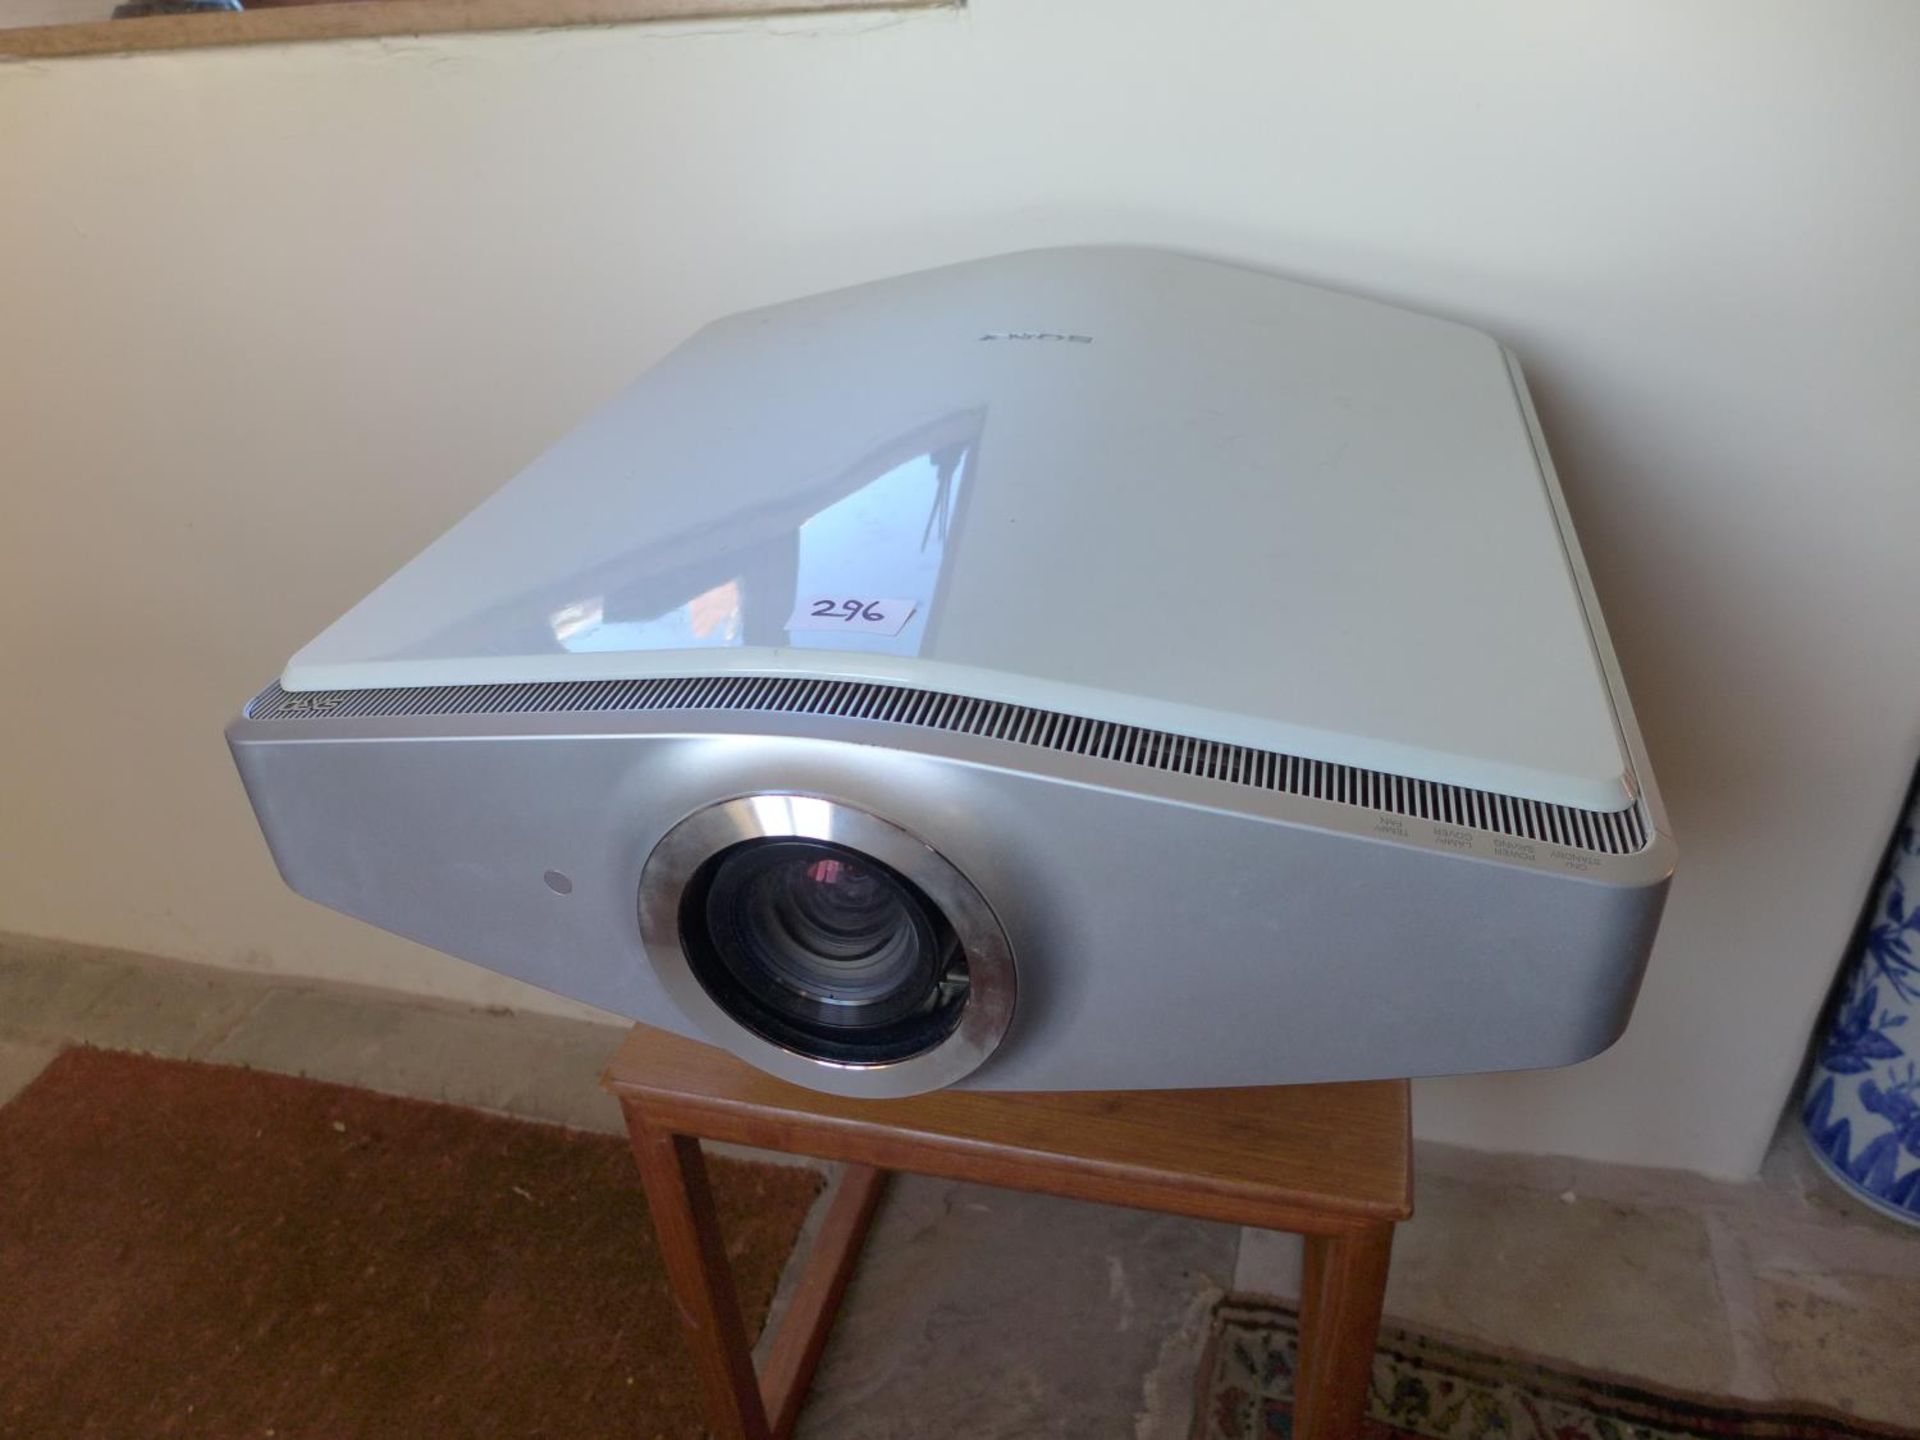 A SONY VPL-VW100 SXRD HOME CINEMA PROJECTOR, 1080P, LAMP 2337 HOURS, REMOTE CONTROL, POWER CABLE,